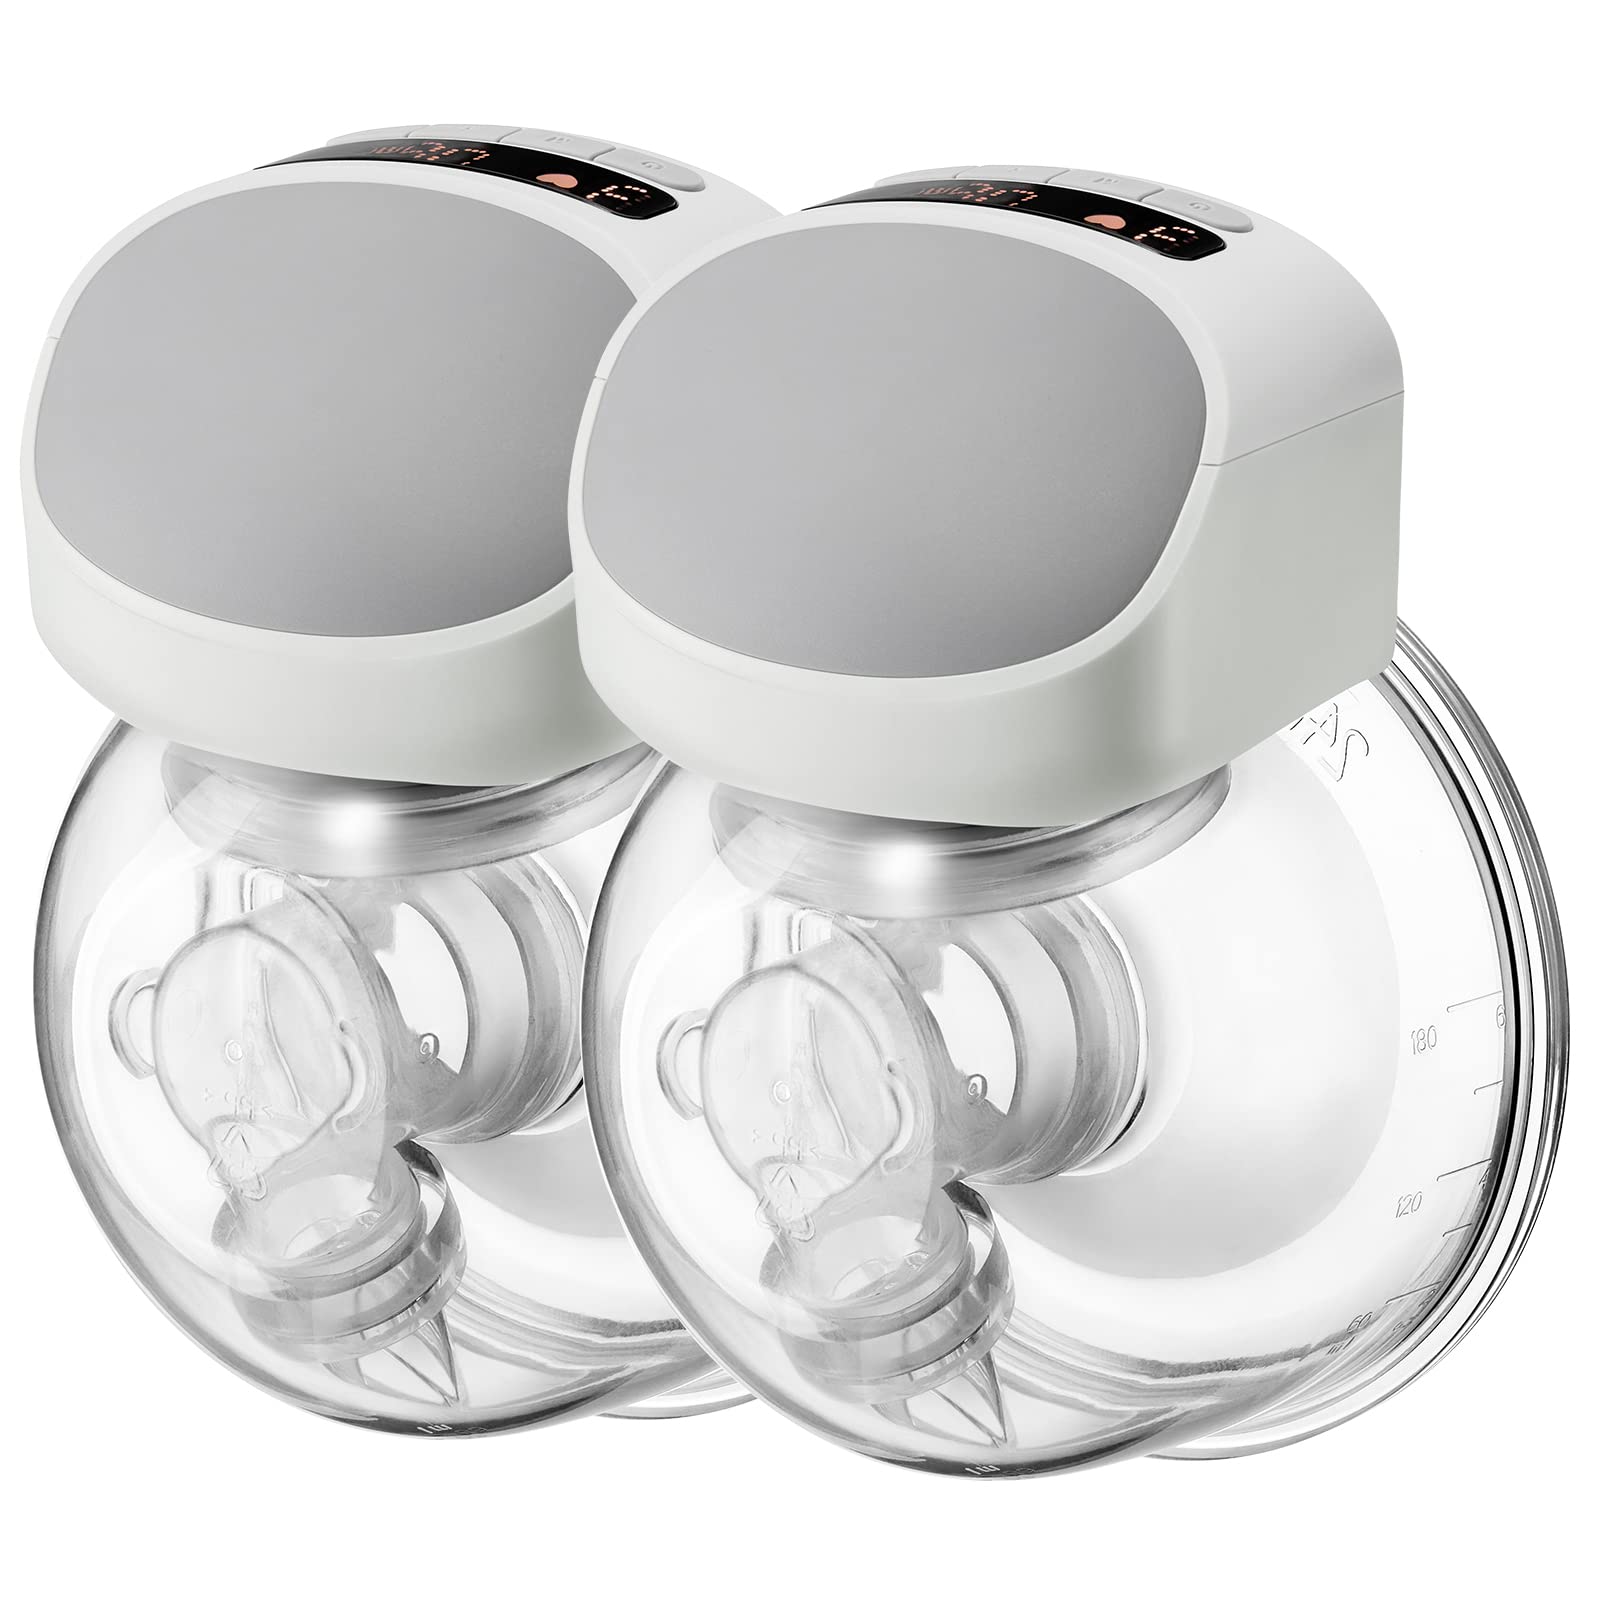 DOOOB Wearable Breast Pump, S10 Pro Electric Breast Pump,Portable Electric Breast Pumps for Breastfeeding with 2 Modes,9 Levels,LCD Display,Memory Function Rechargeable,24mm Flange, 2 Pack